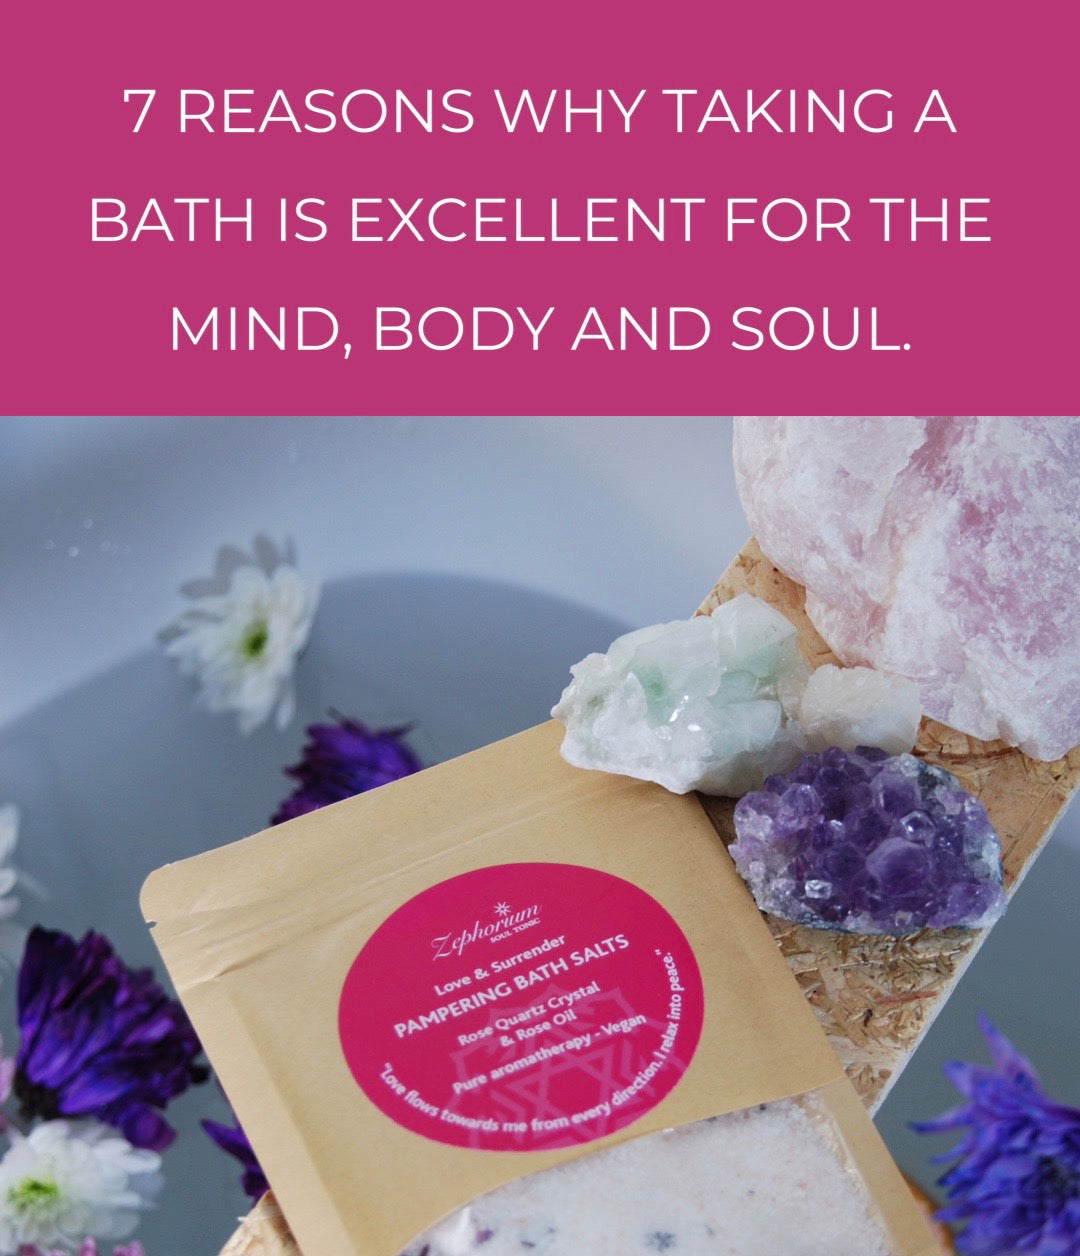 7 Reasons Why Taking a Bath is Excellent for the Mind, Body and Soul.